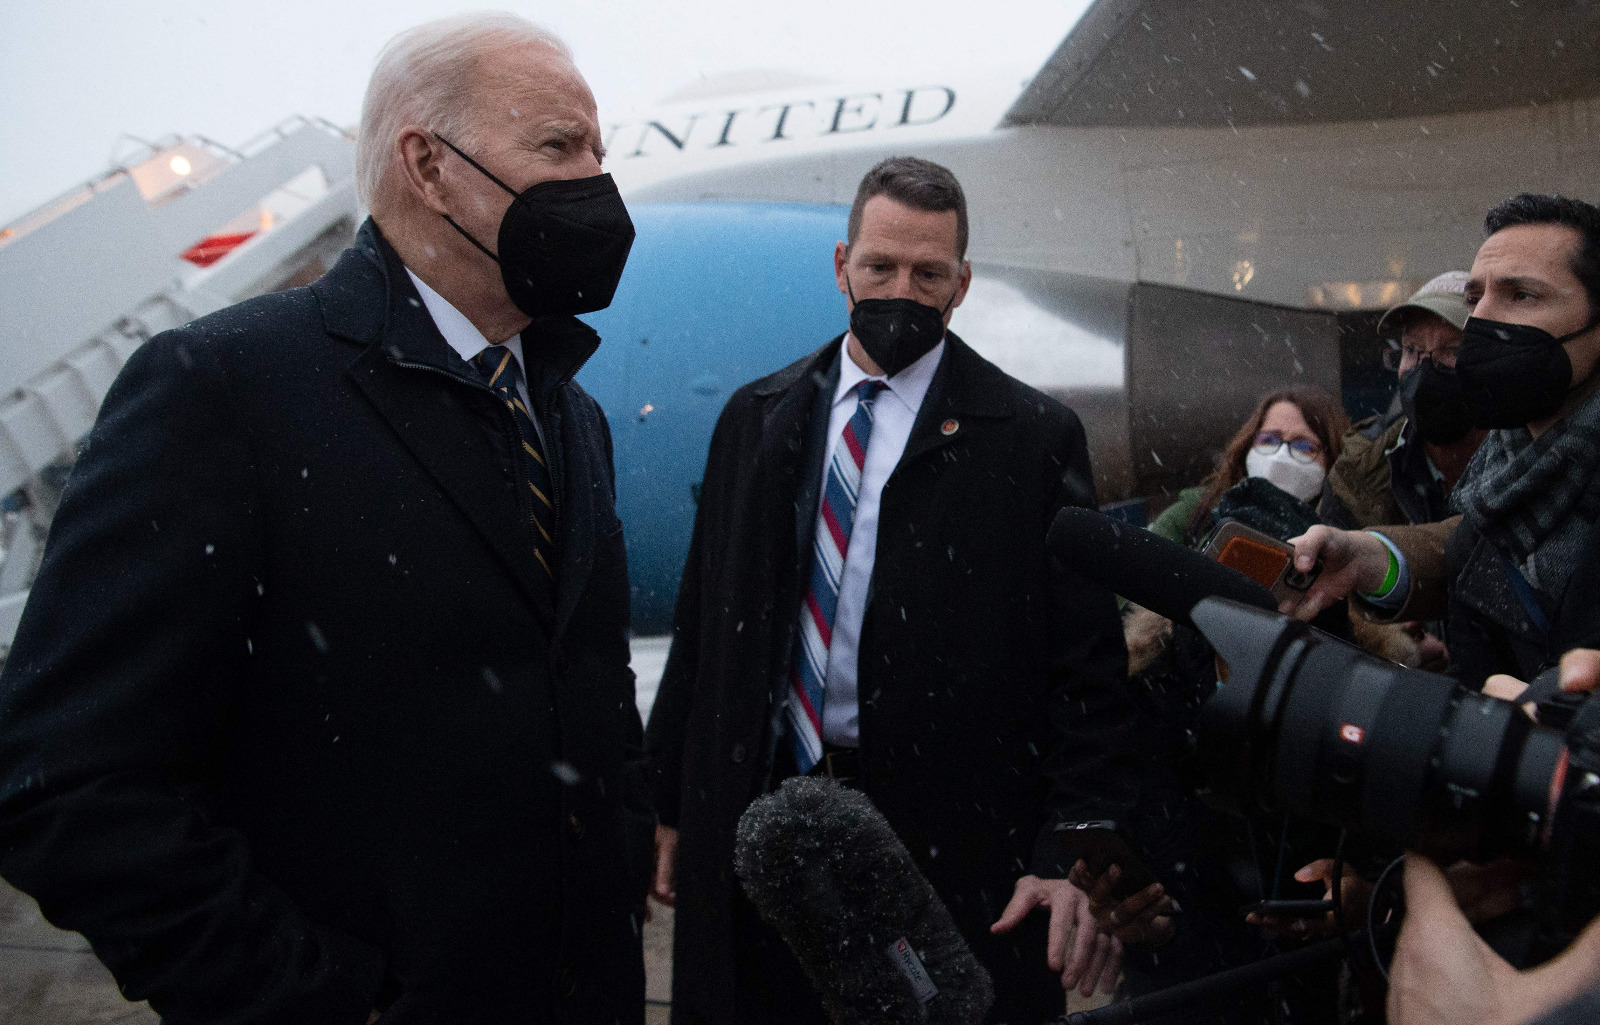 Joint Base Andrews, Maryland: US President Joe Biden speaks to the press about the situation in Ukraine, after arriving on Air Force One at Joint Base Andrews in Maryland, January 28, 2022. – AFP